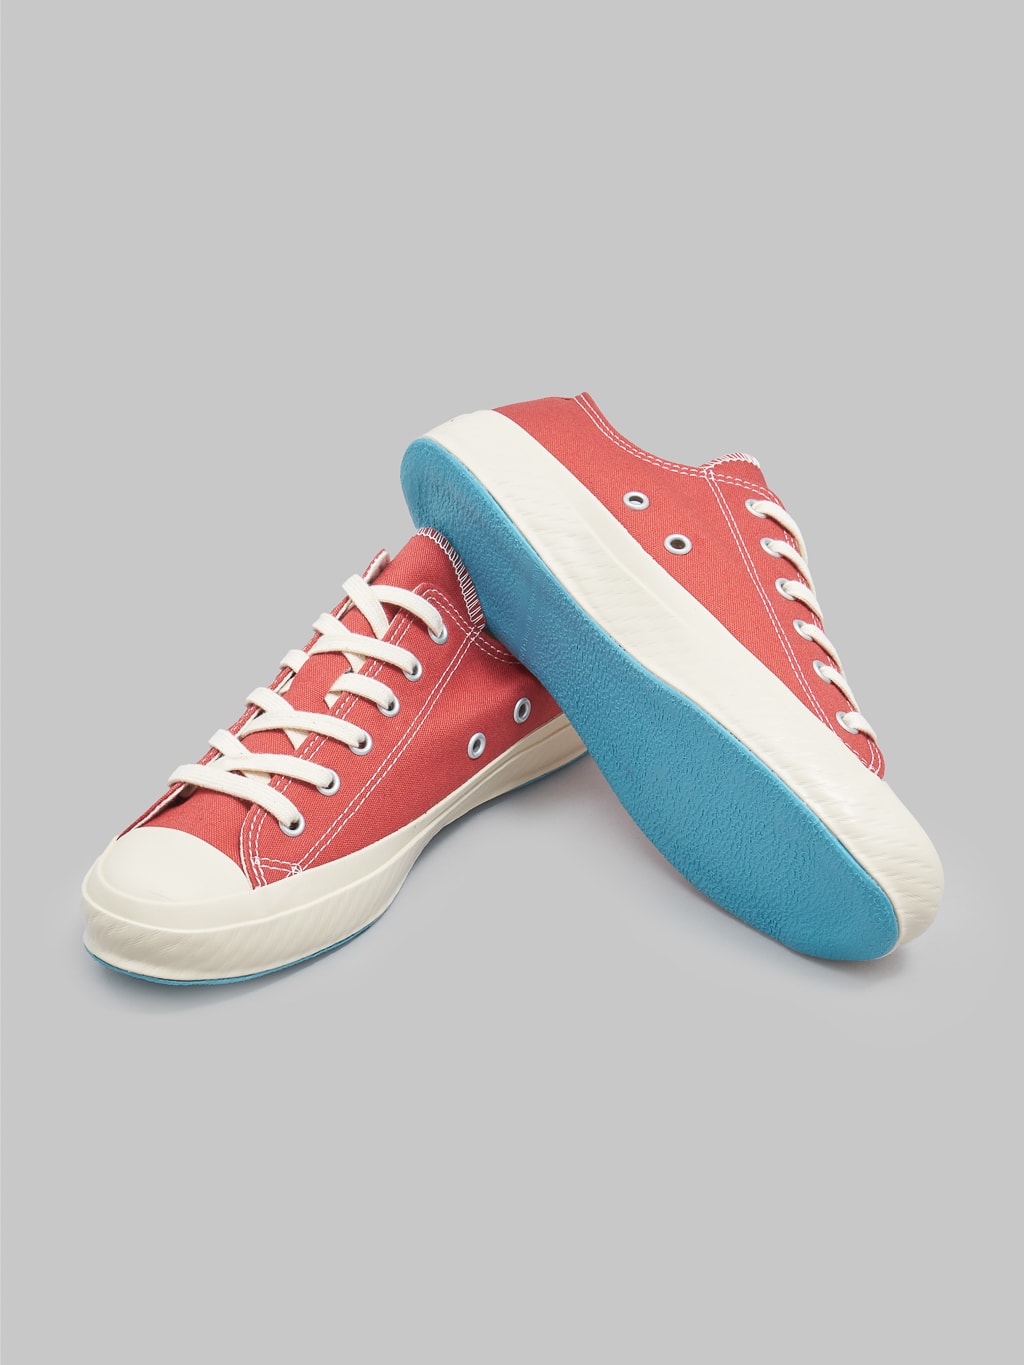 Shoes Like Pottery 01JP Low Sneaker Red